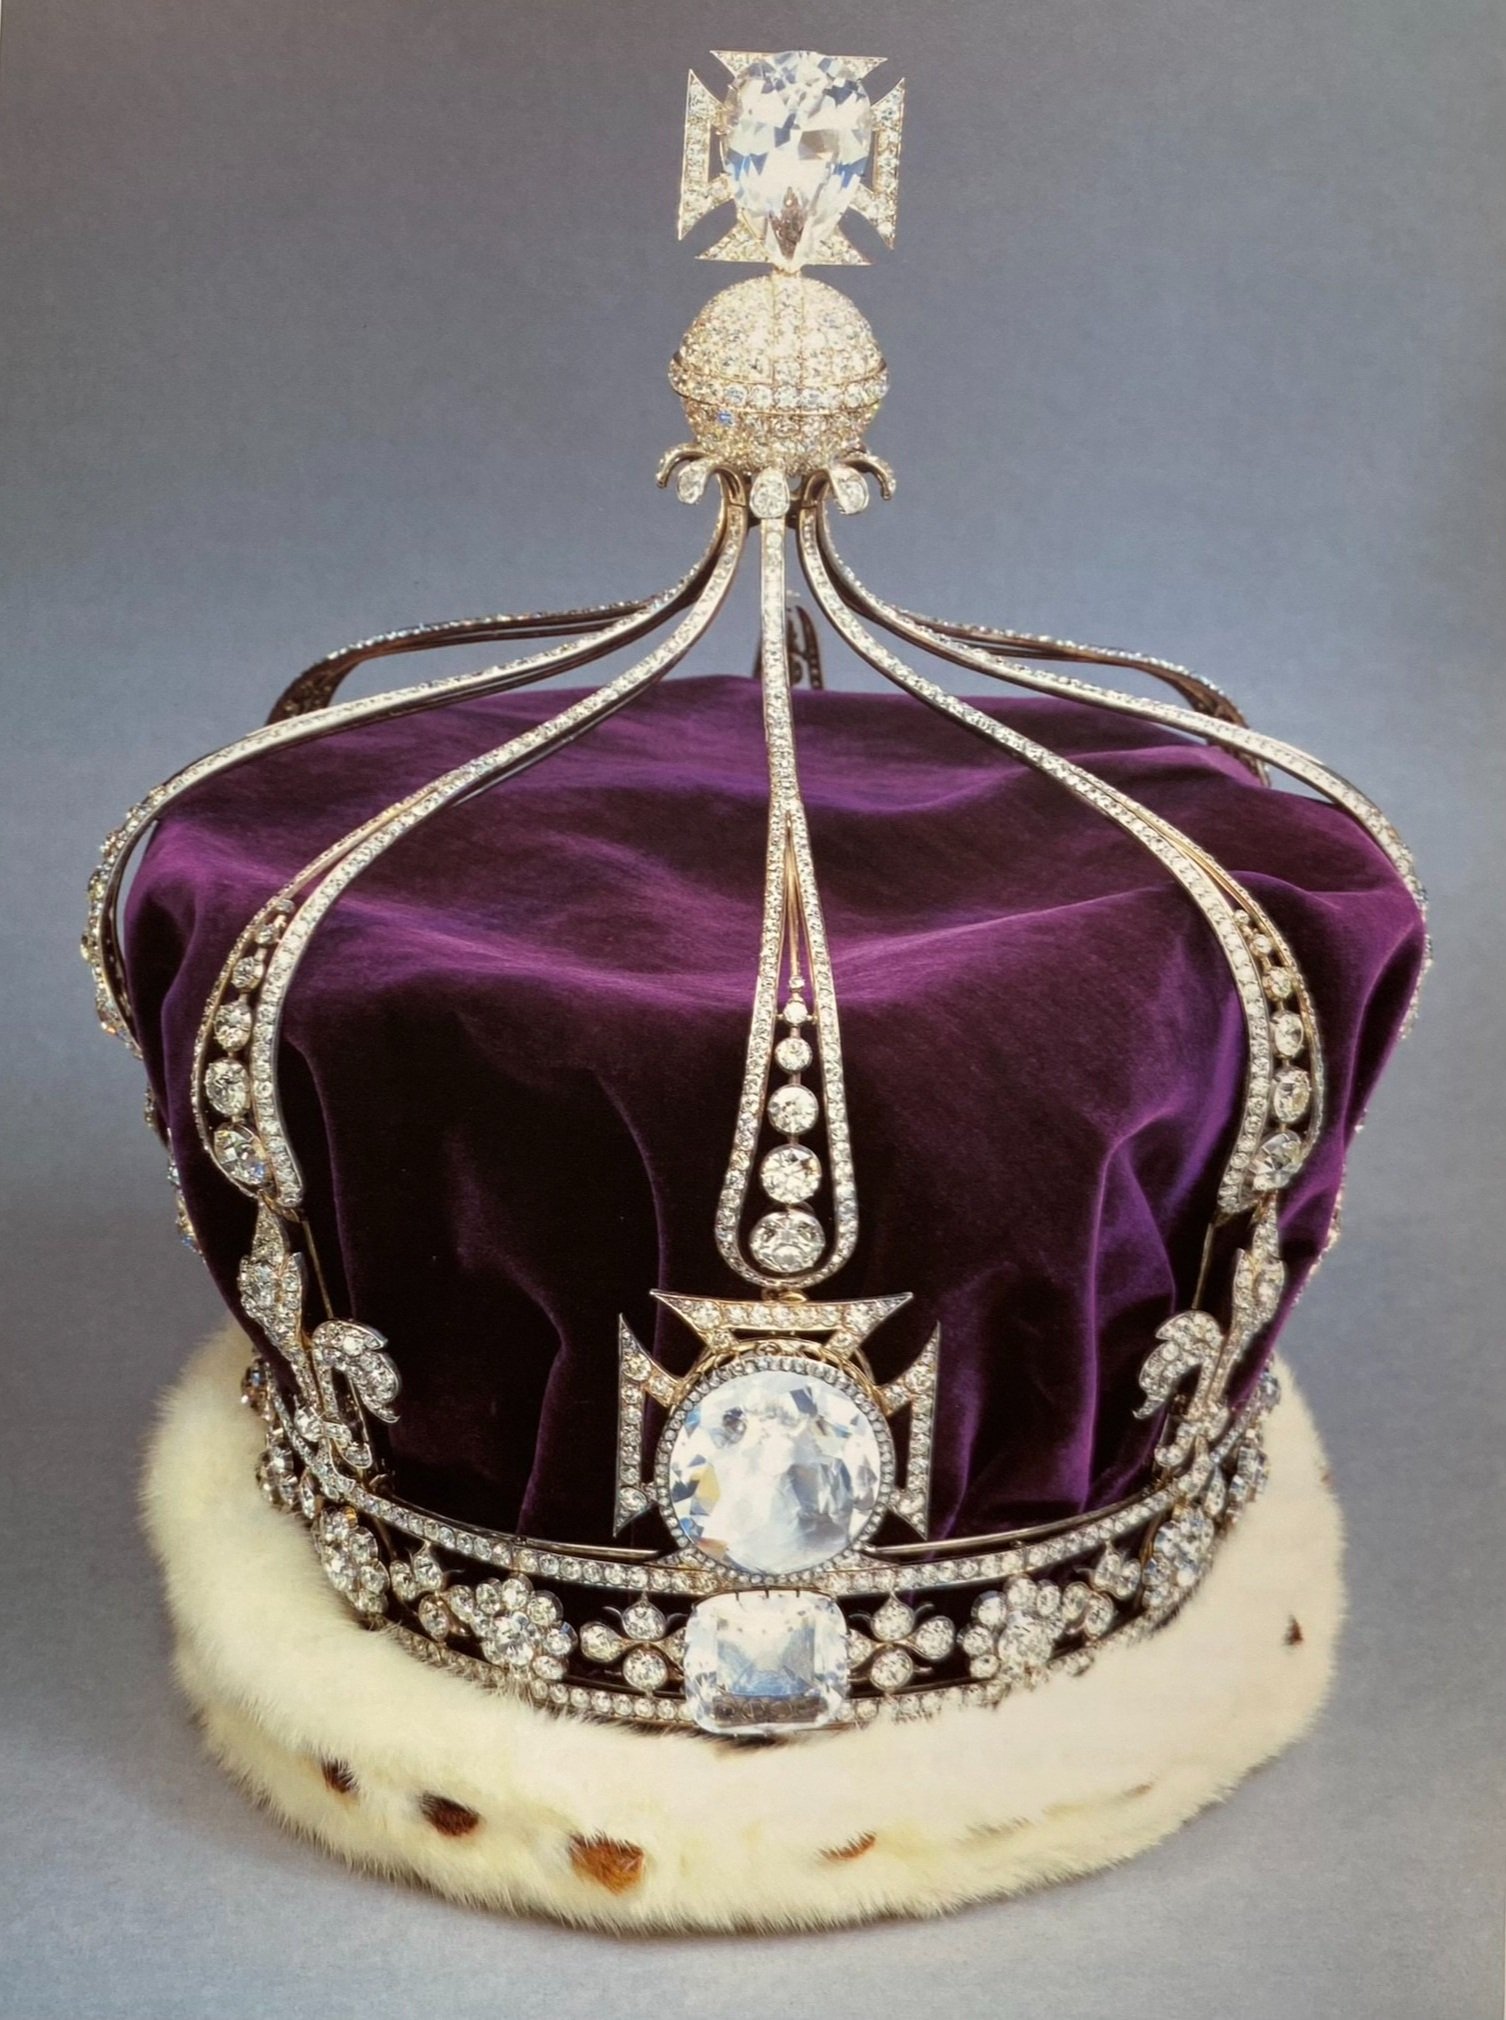 Queen Mary’s Crown with diamonds & quartz replicas of Cullinan III & IV.